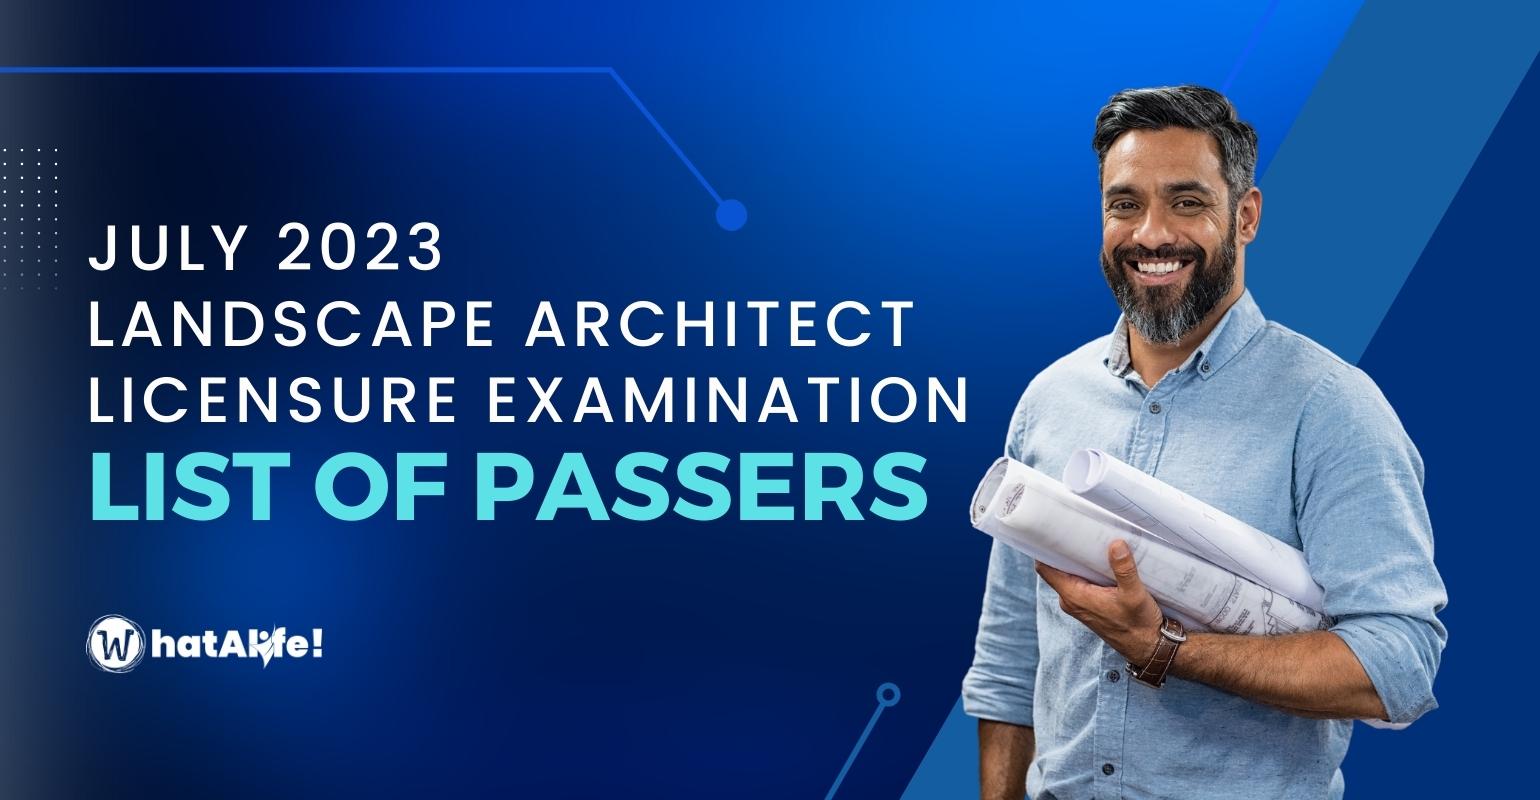 Full List of Passers — July 2023 Landscape Architect Licensure Exam Results